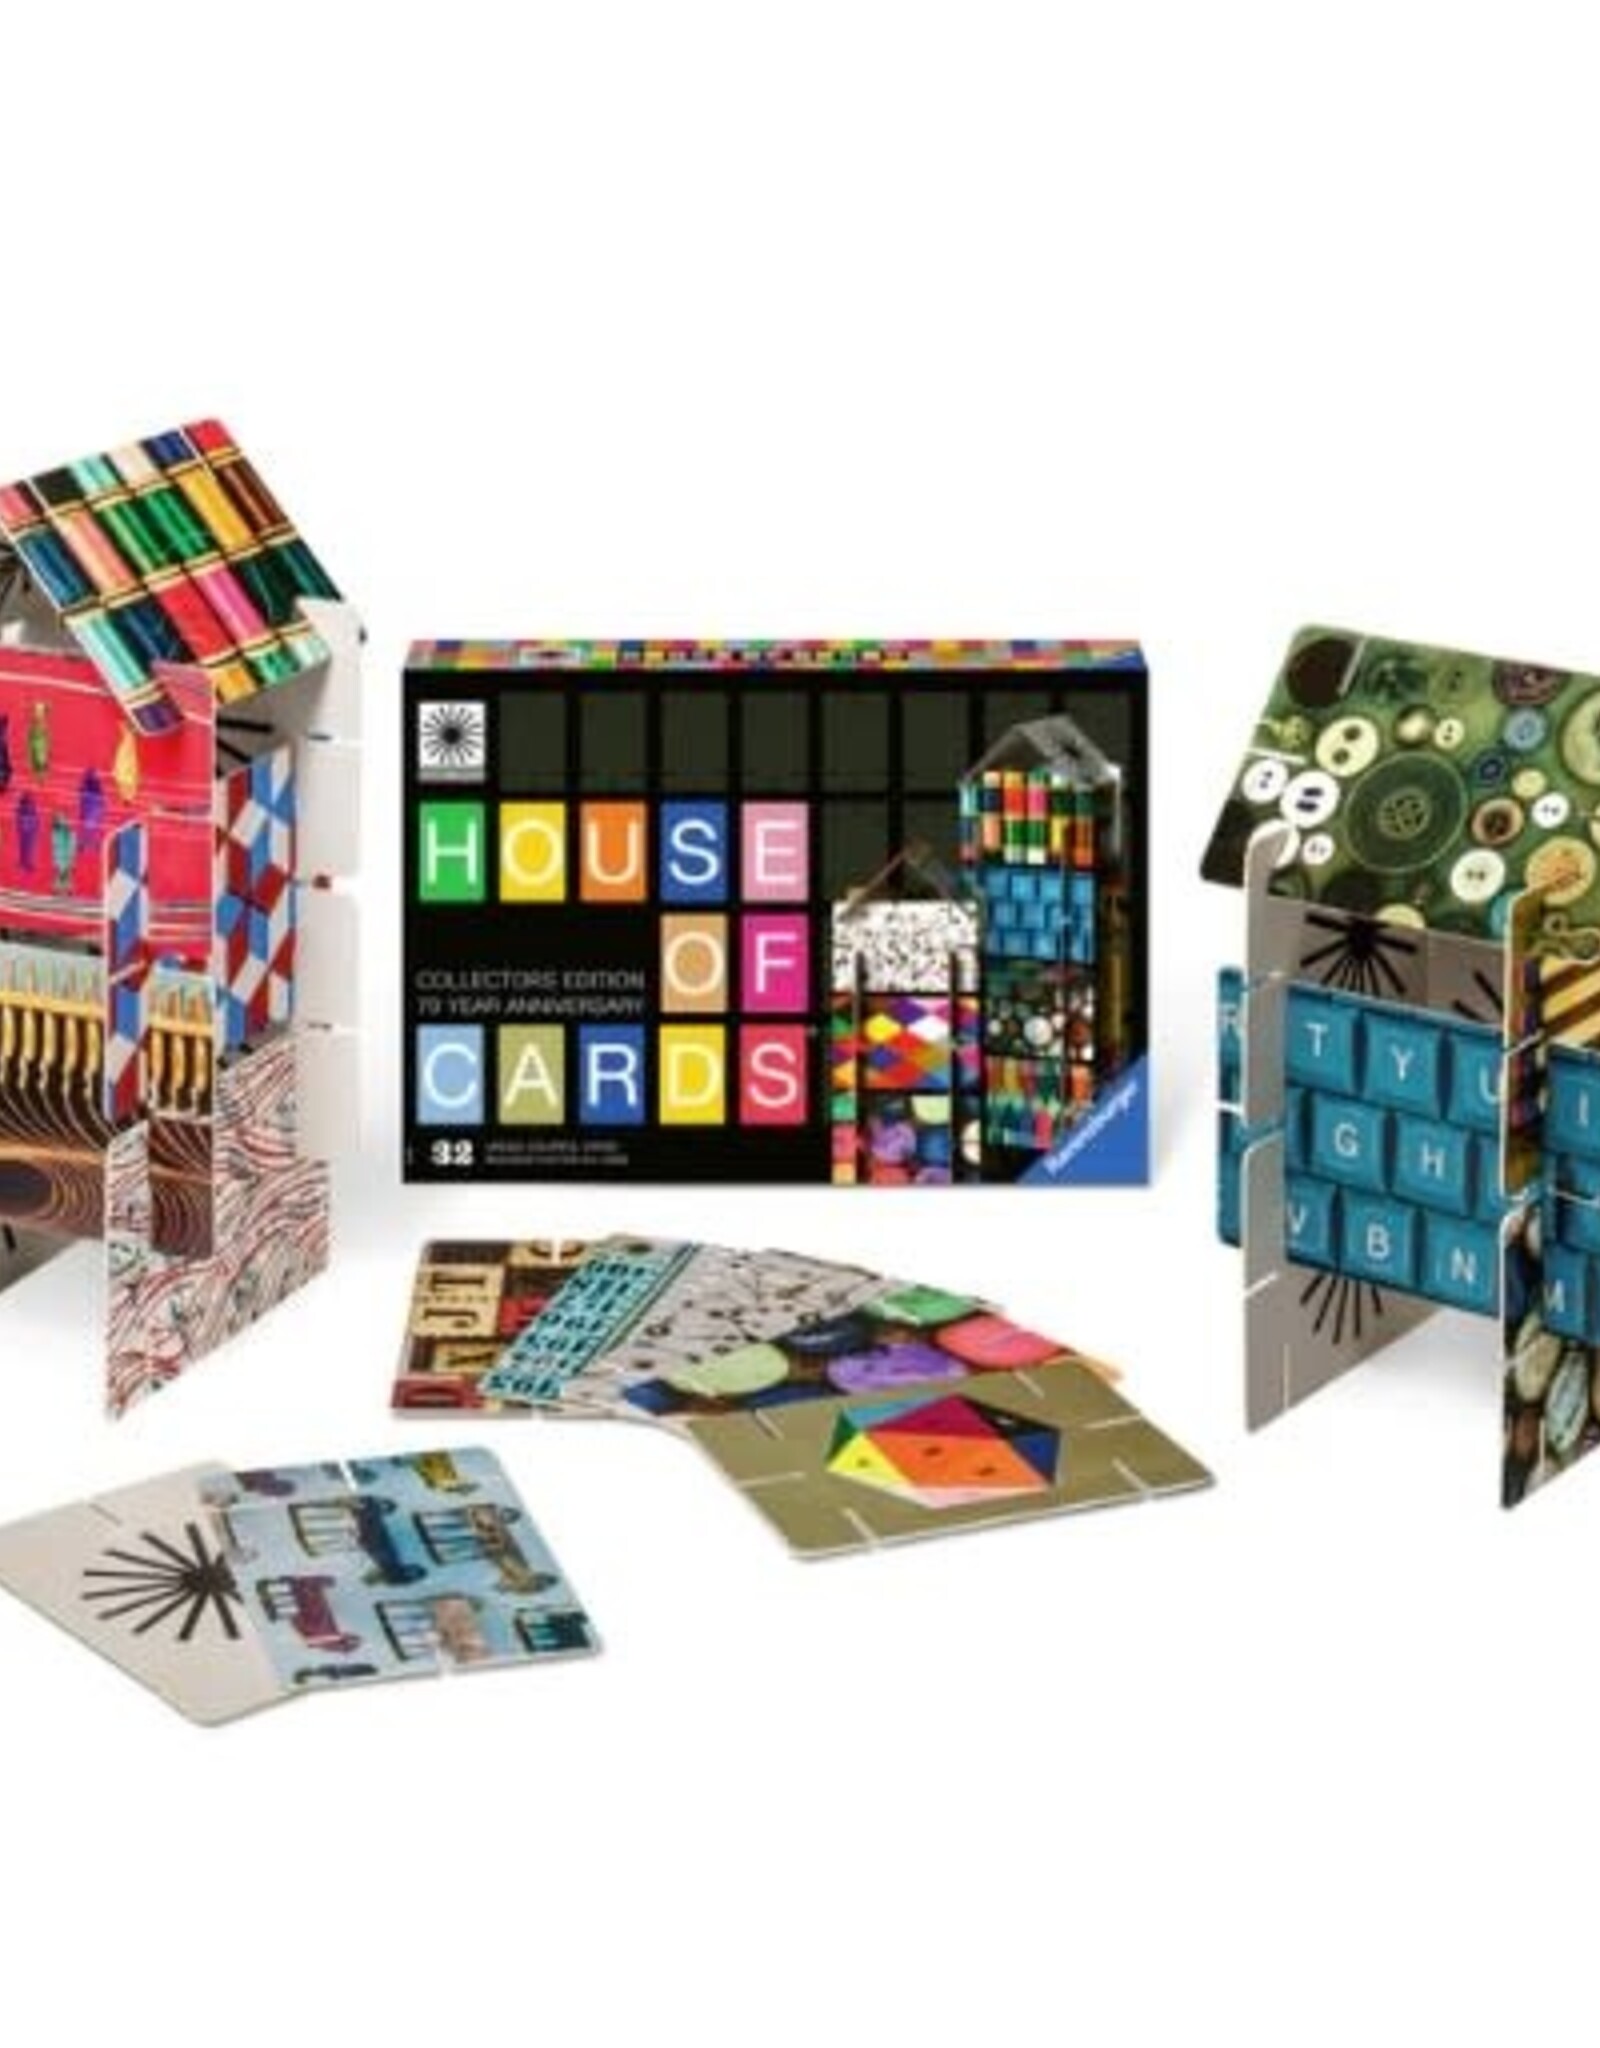 Ravensburger Eames House of Cards Collectors Edition